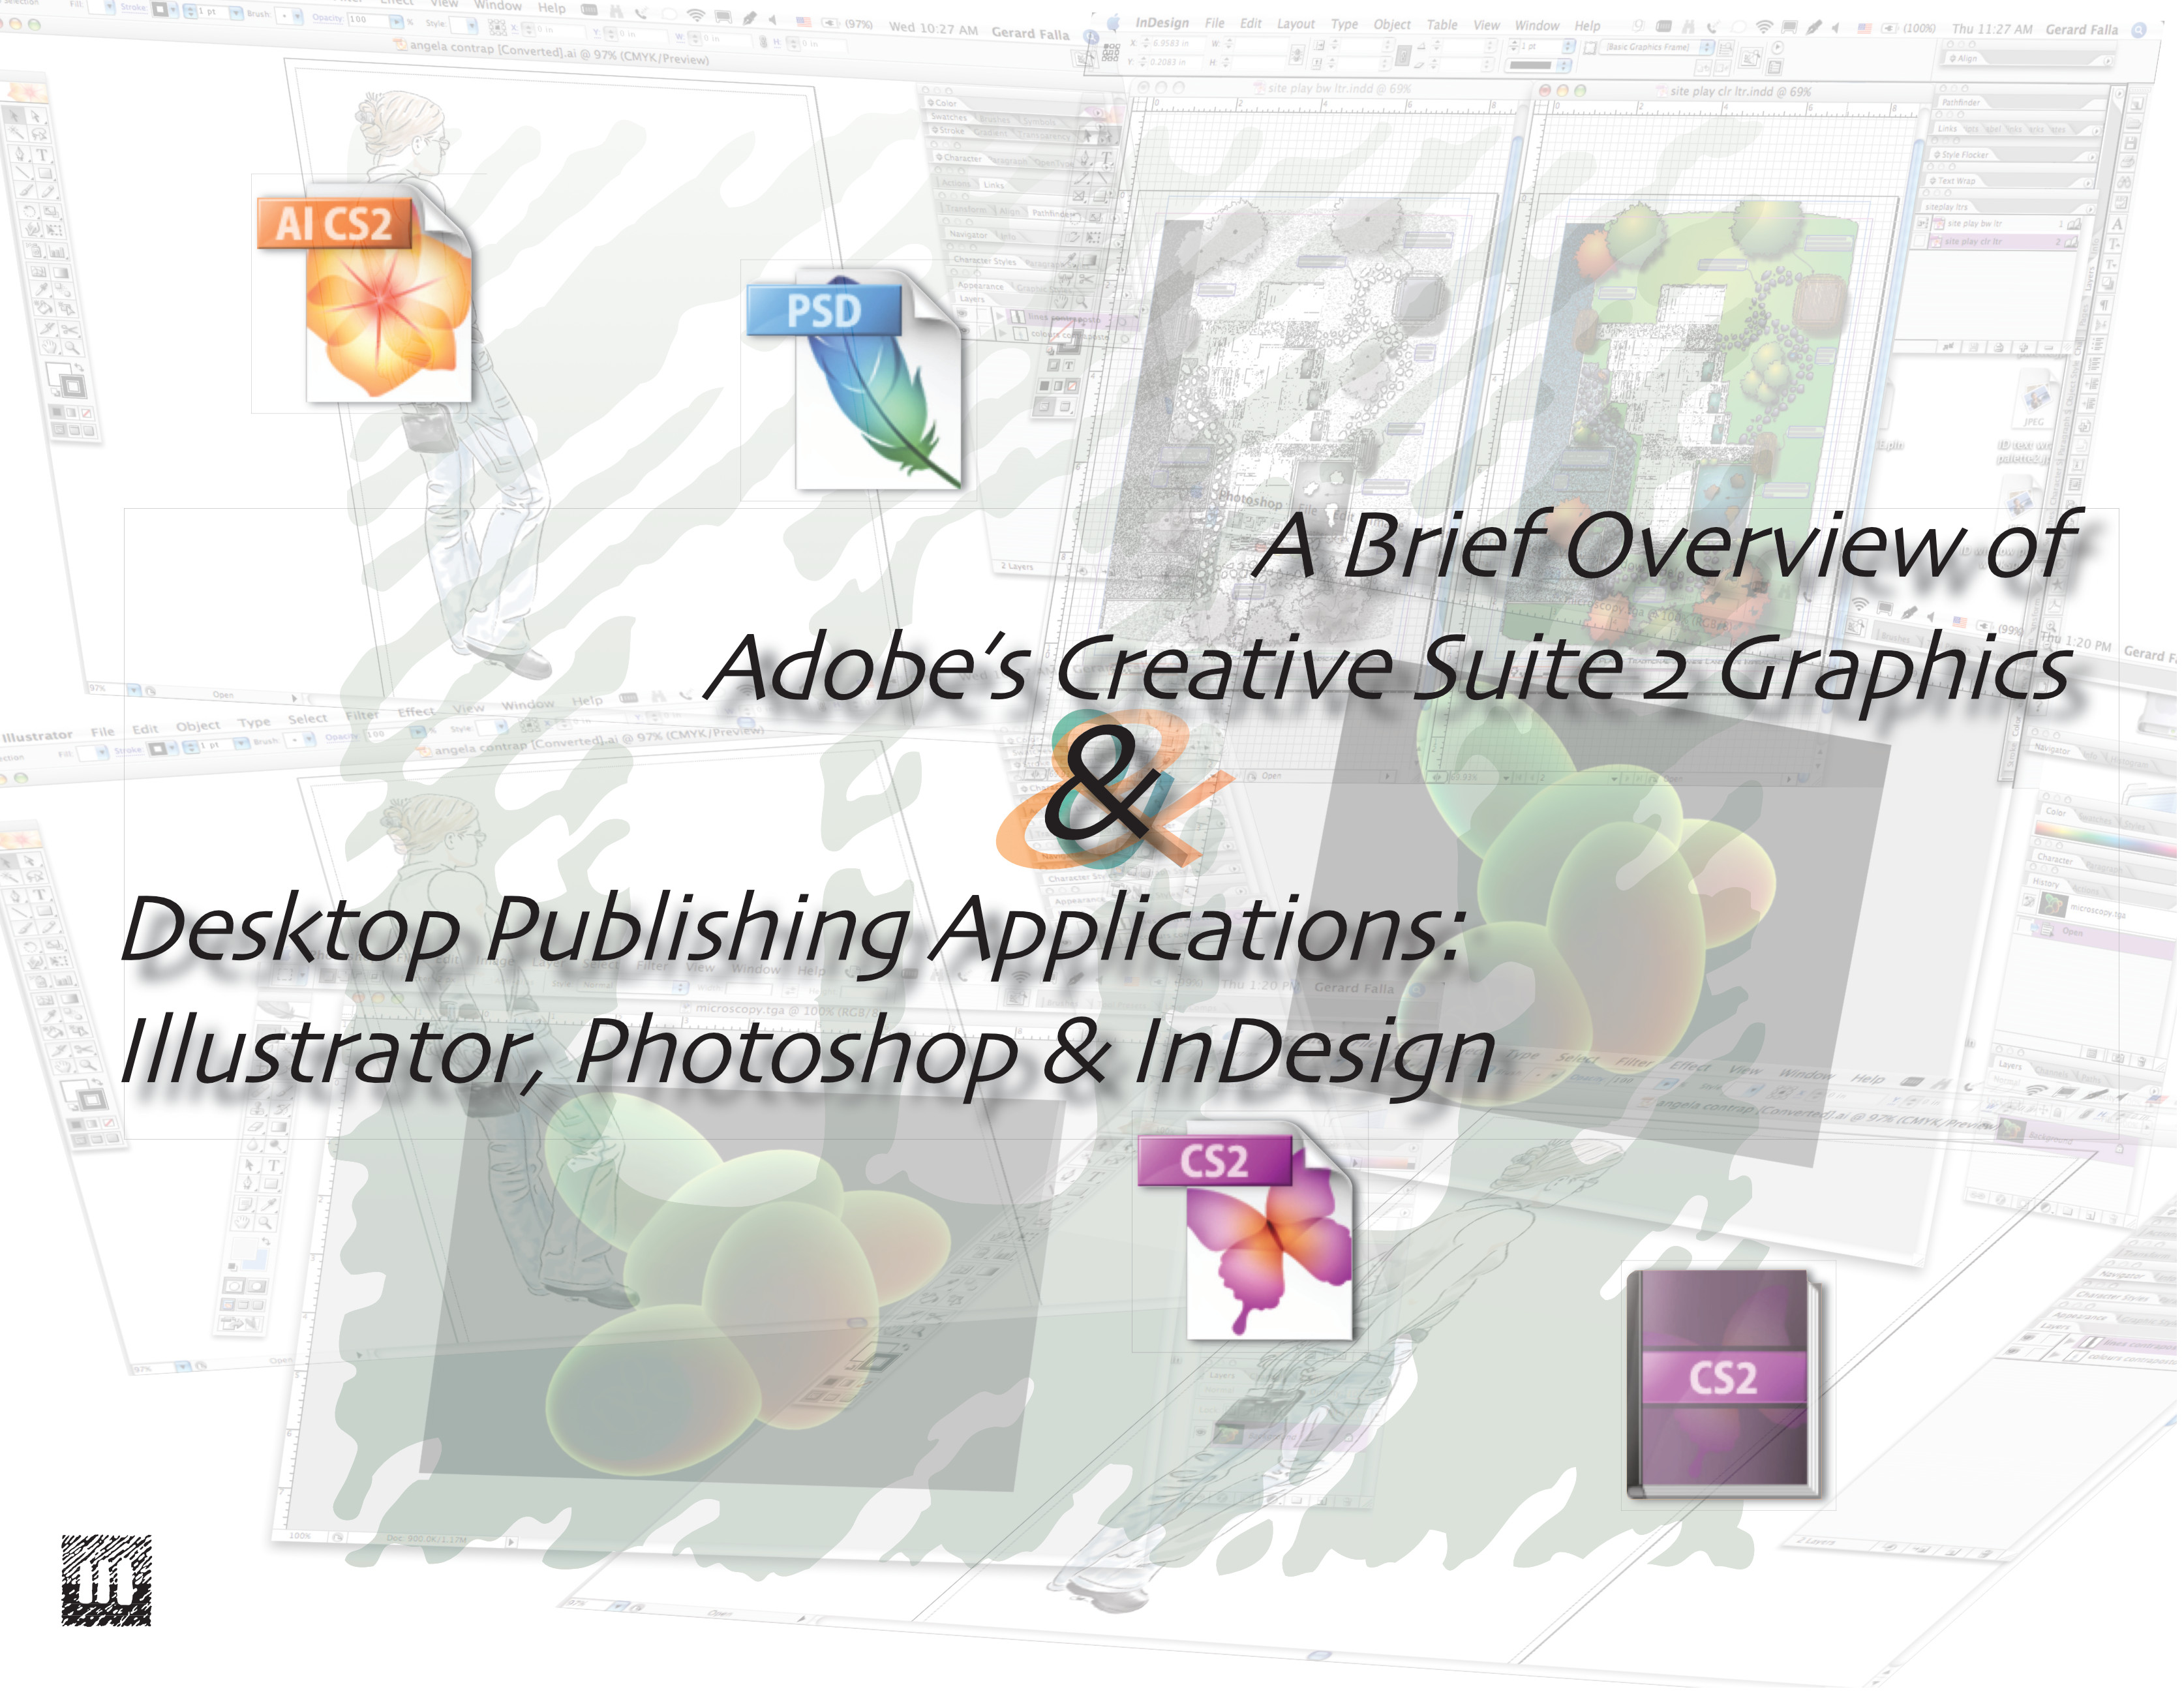 Old Work: Technical Document introducing new users to Adobe CS concepts